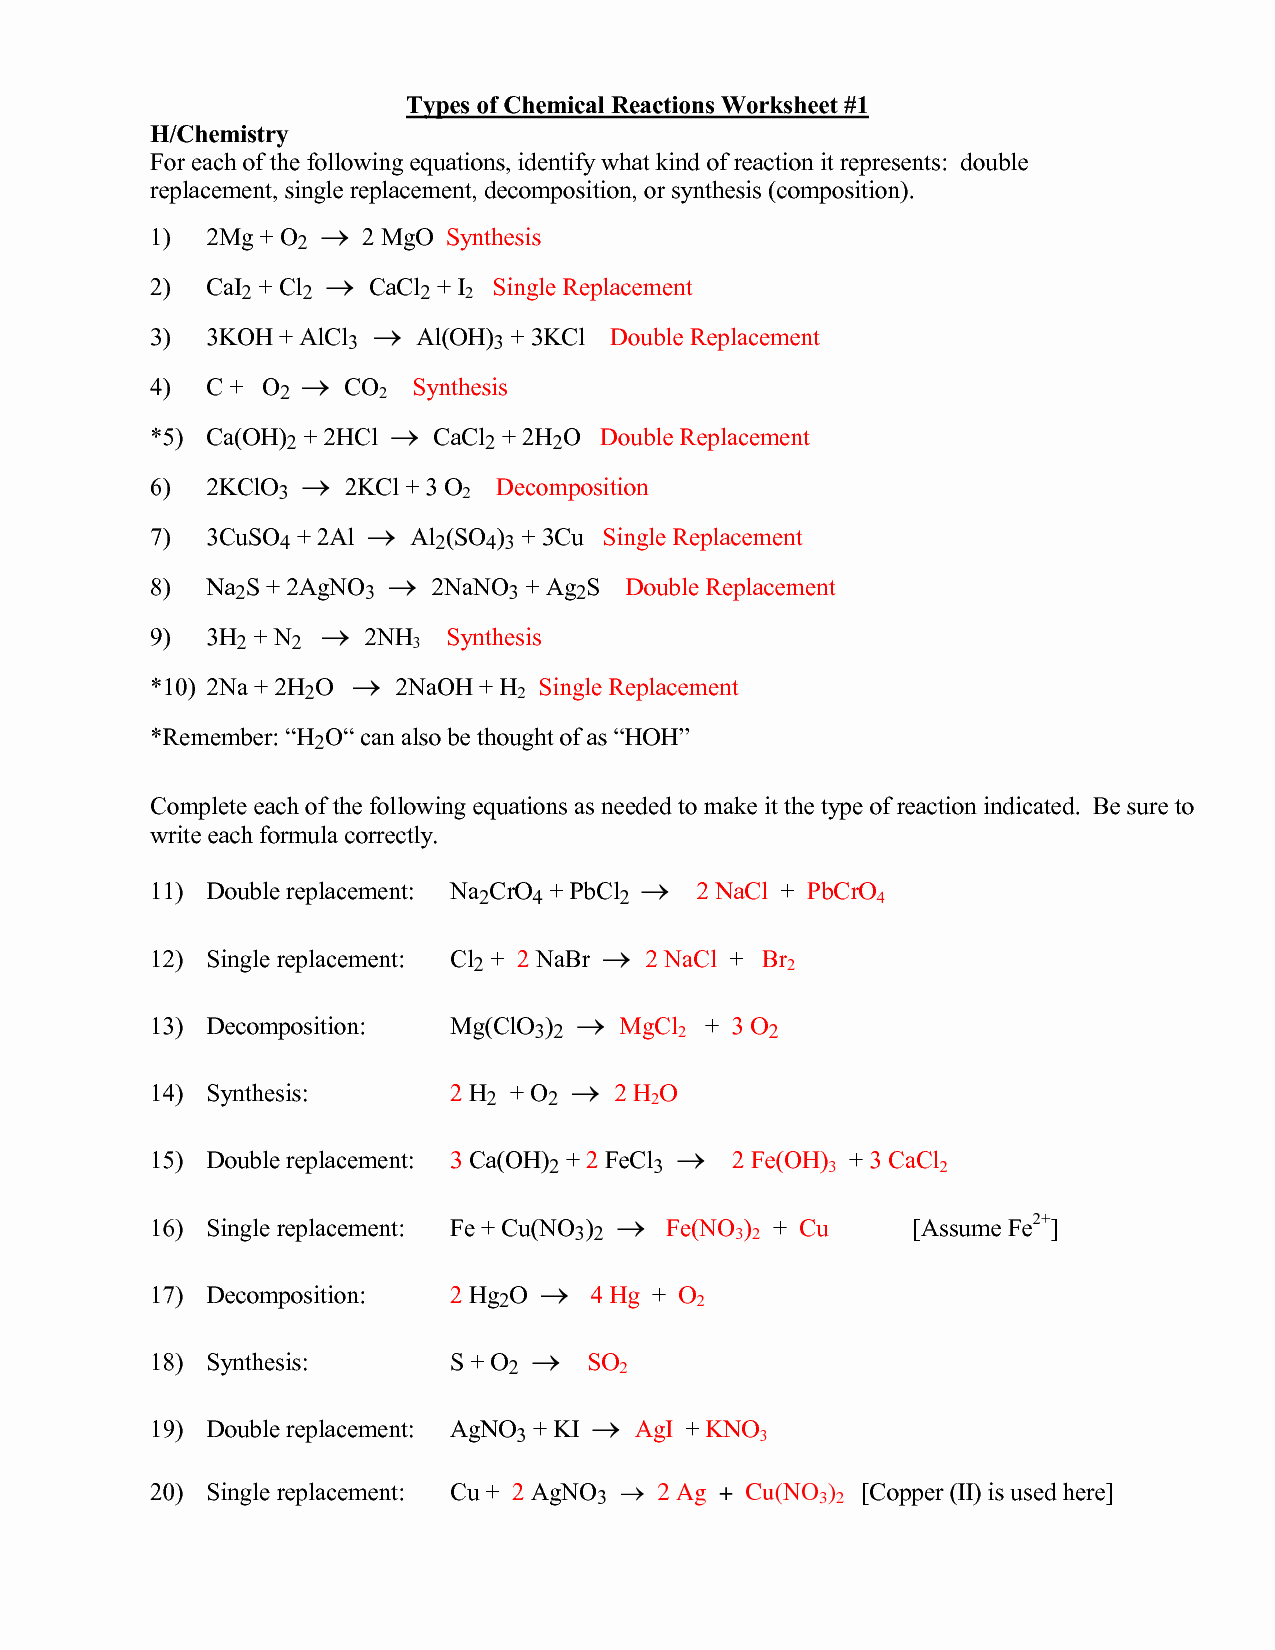 Types Of Reactions Worksheet Answers Awesome 16 Best Of Types Chemical Reactions Worksheets